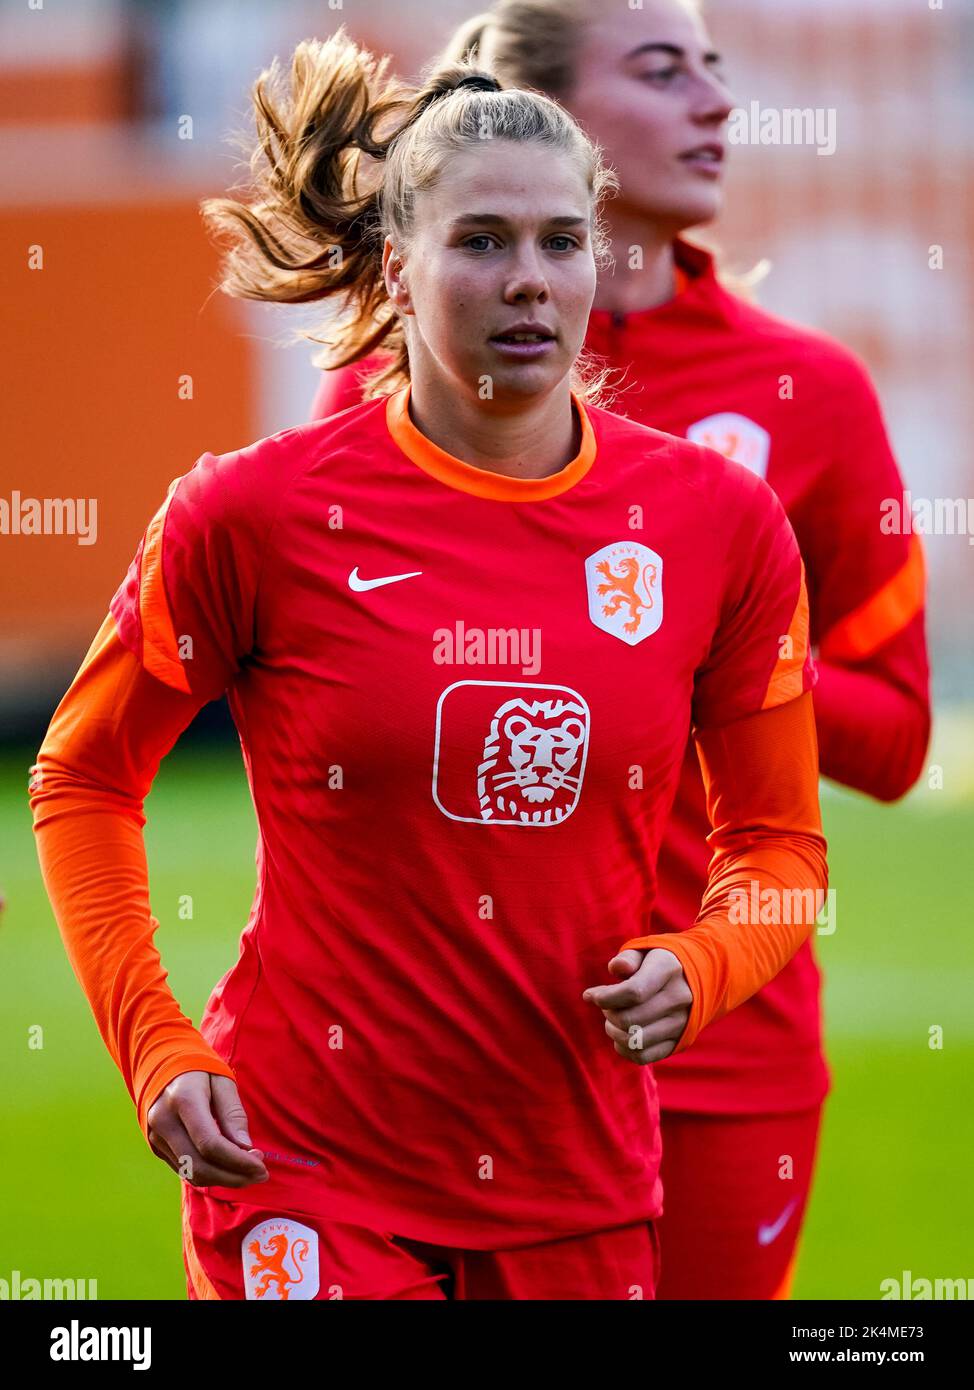 ZEIST, NETHERLANDS - OCTOBER 3: Lize Kop of the Netherlands during a Training Session of the Netherlands Women’s Football Team at the KNVB Campus on October 3, 2022 in Zeist, Netherlands (Photo by Joris Verwijst/Orange Pictures) Stock Photo